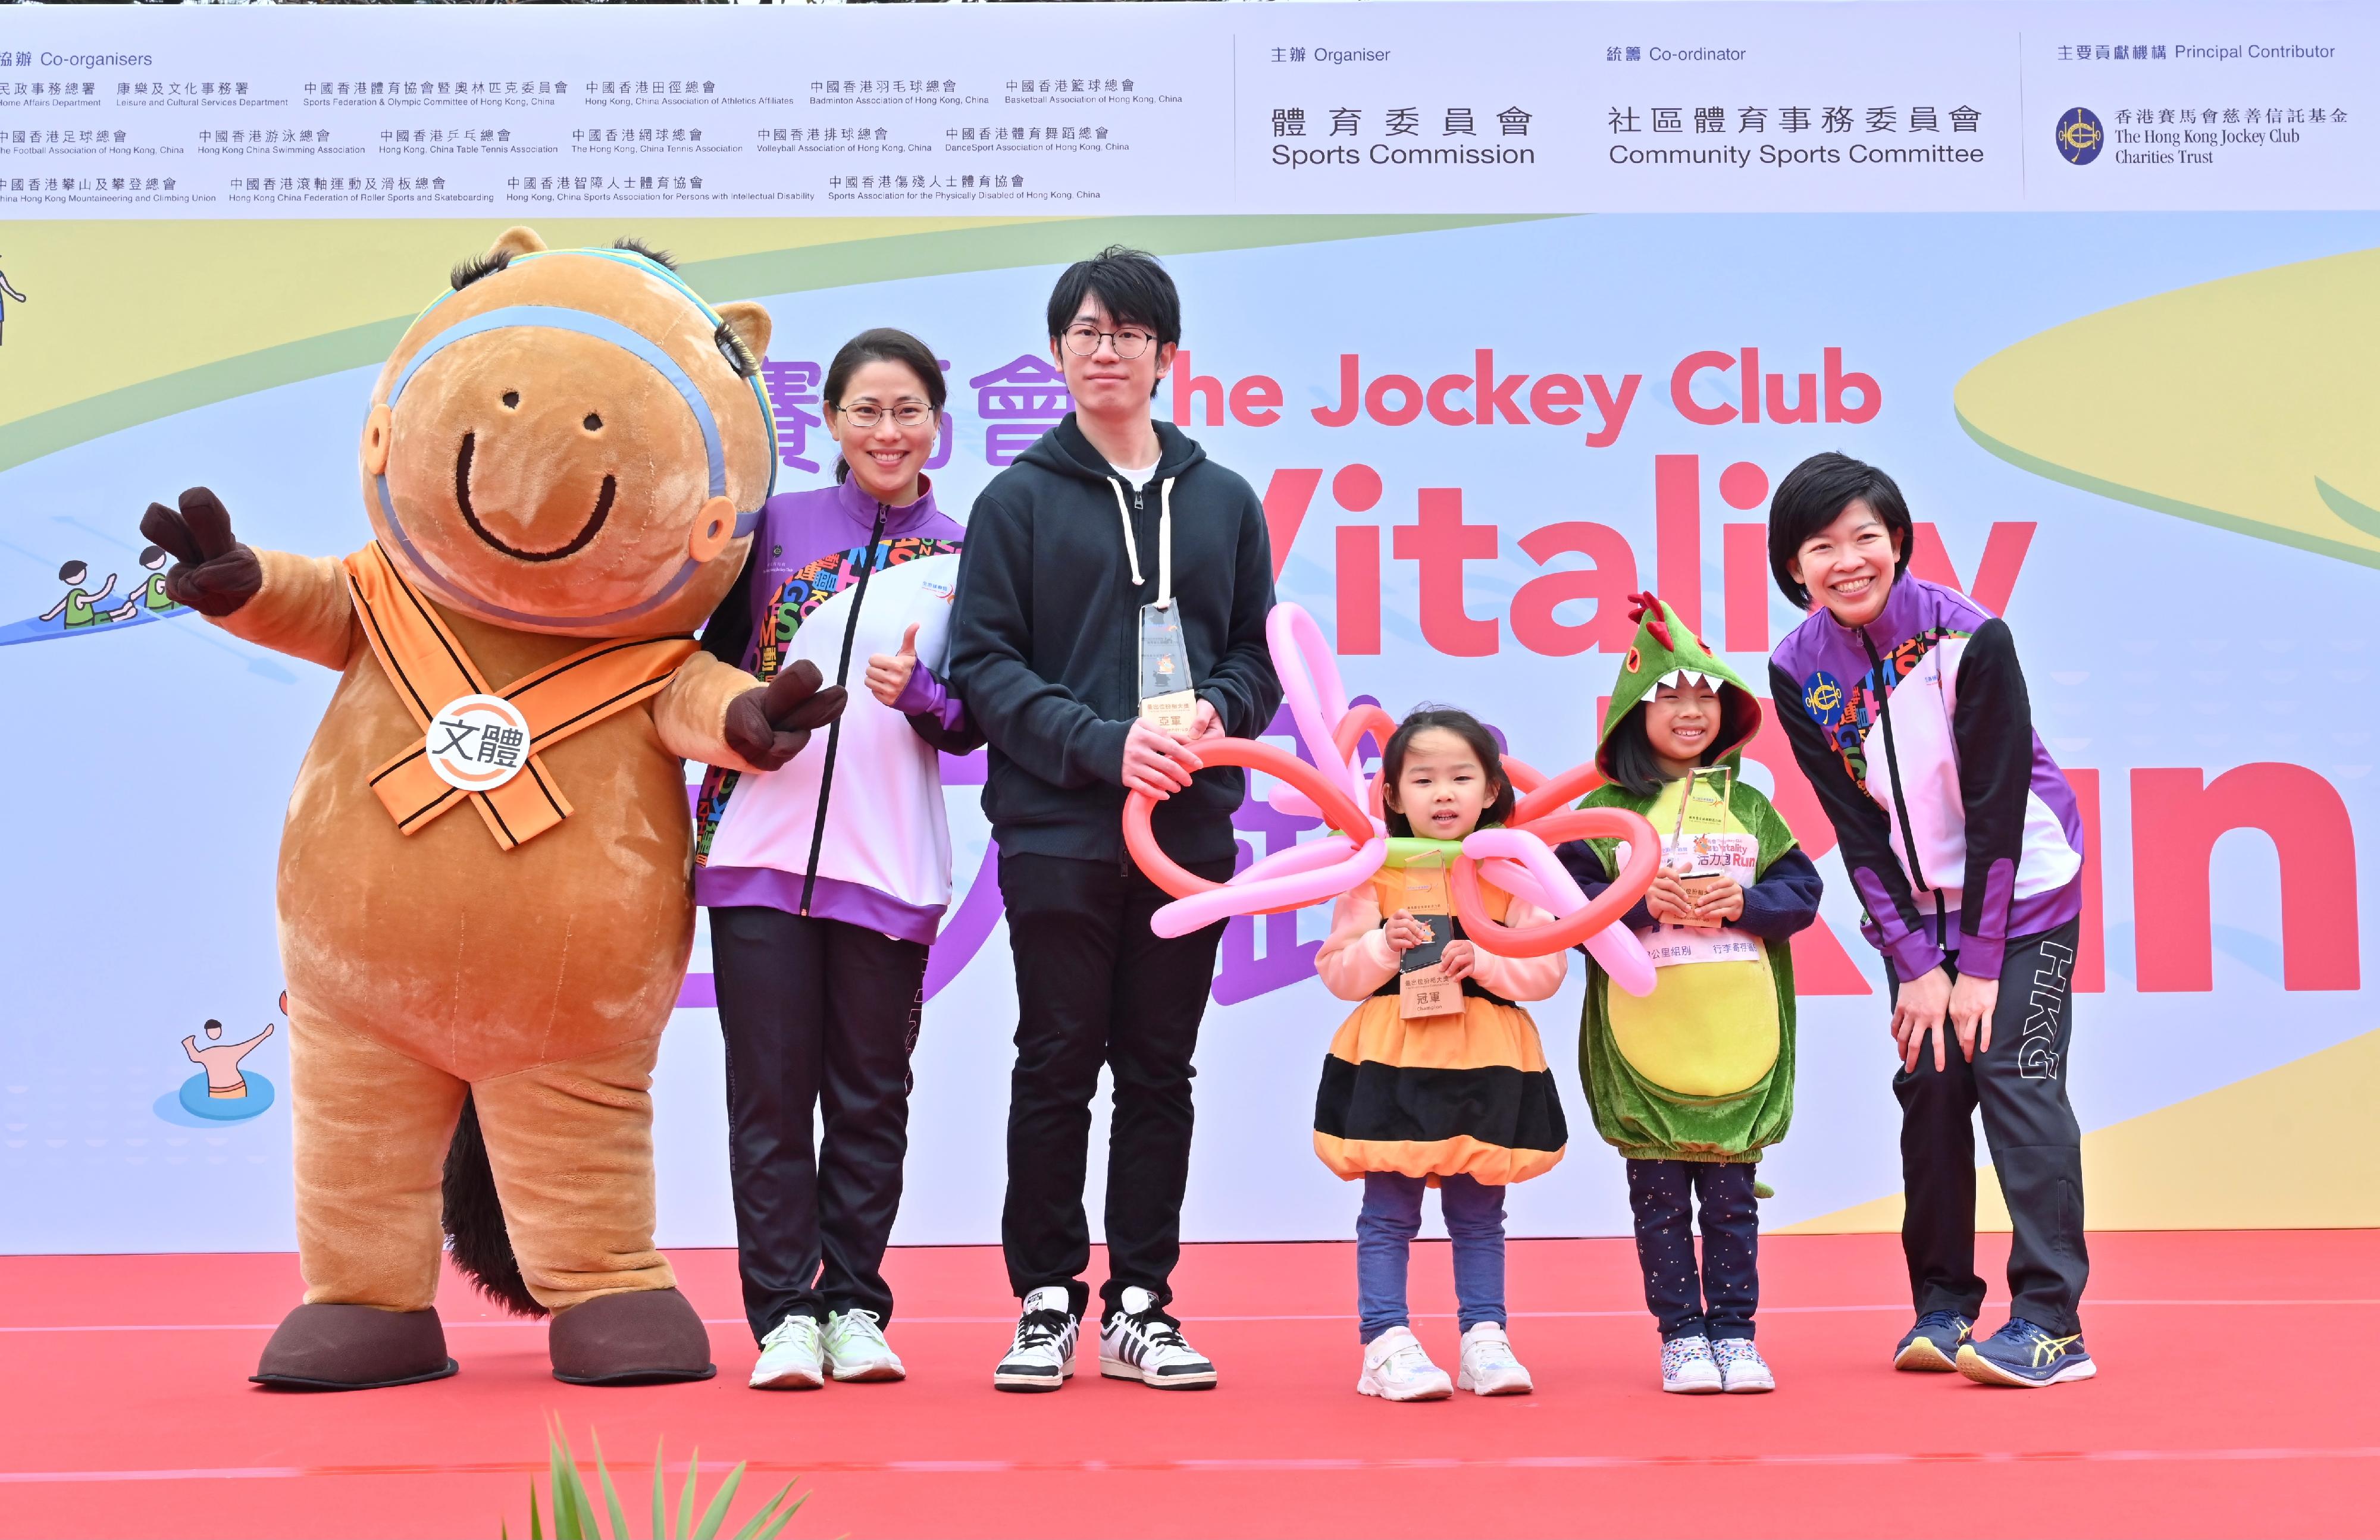 The 9th Hong Kong Games' Jockey Club Vitality Run was held alongside the Shing Mun River in Sha Tin this morning (March 3) , runners dressed up and competed for the Costume Prizes. Photo shows the Executive Manager of Charities (Sports & Institute of Philanthropy) of the Hong Kong Jockey Club, Ms Donna Tang (first right), and the Honorary Treasurer of the Hong Kong, China Association of Athletics Affiliates, Ms Irene Chan (second left), with the champion (third right), the first runner-up (third left) and the second runner-up (second right) of the individual Most Creative Costume Prizes.